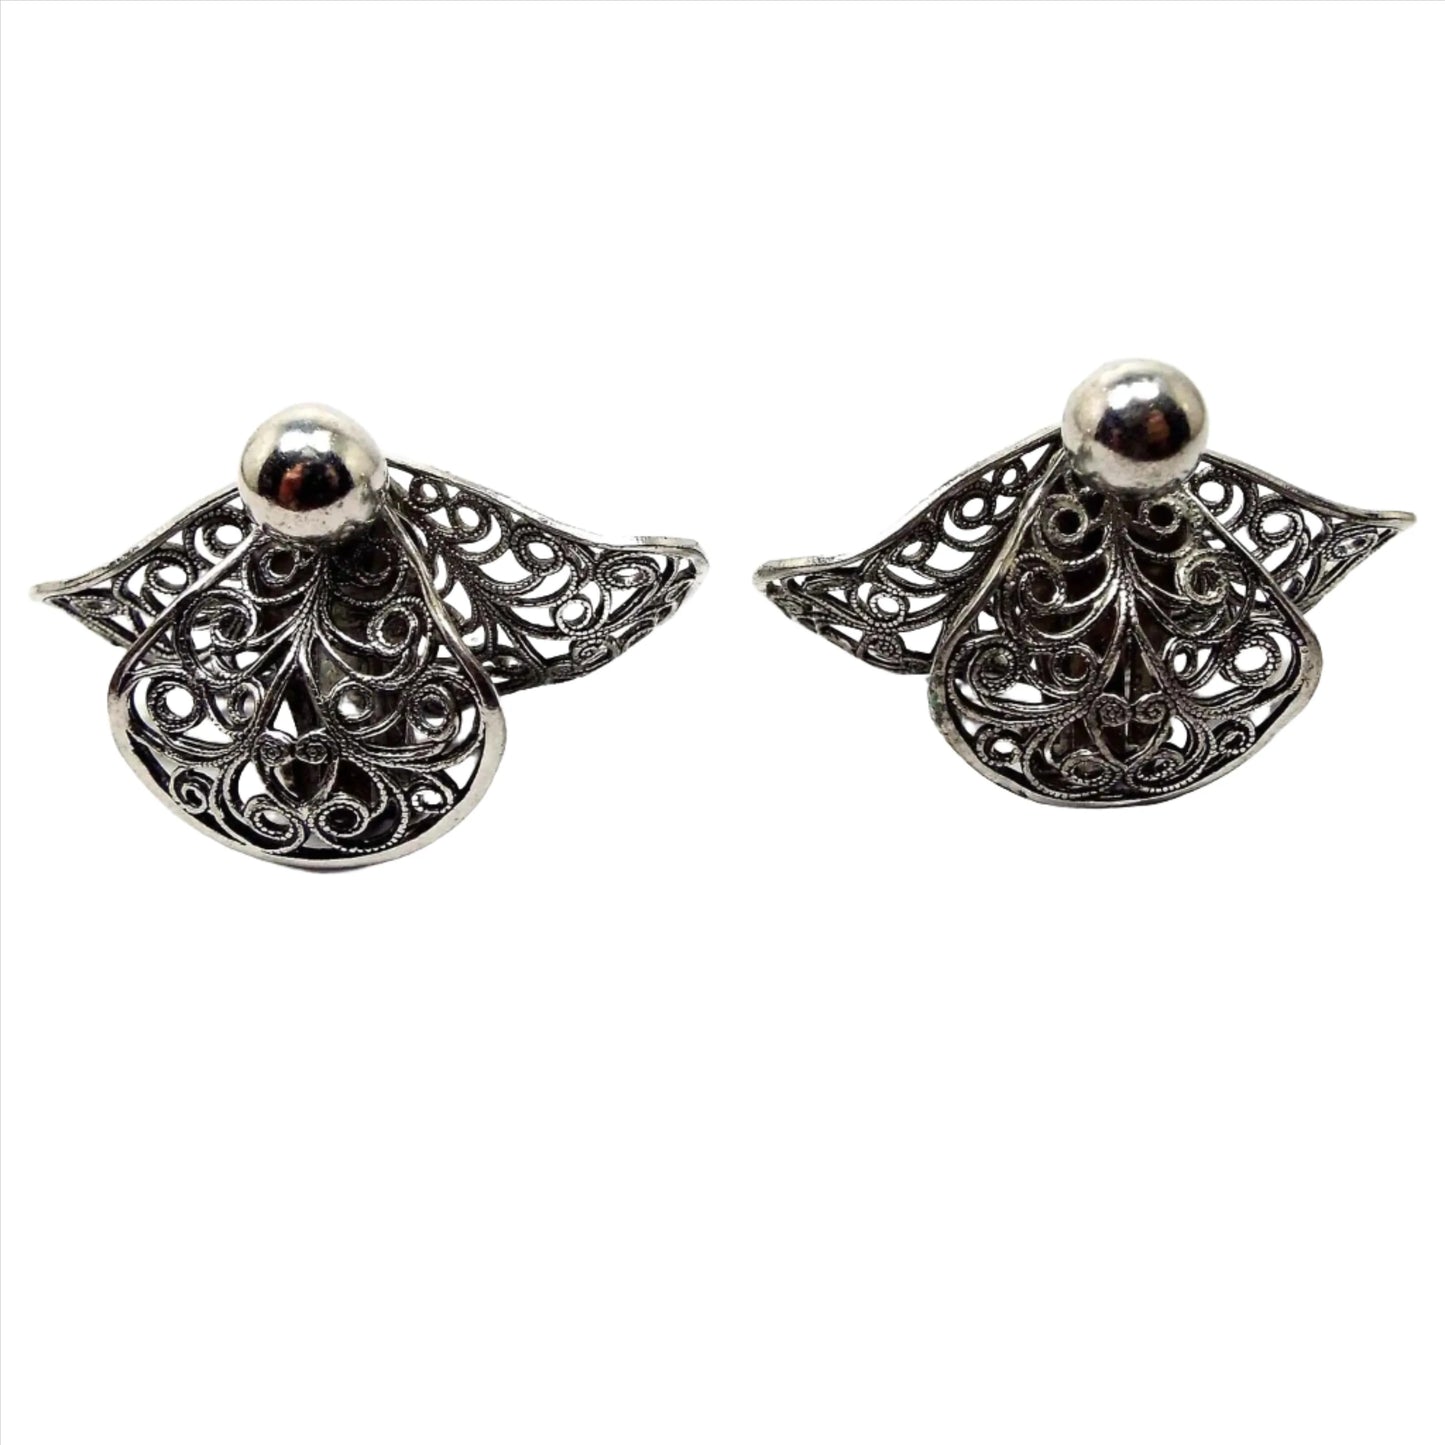 Front view of the Mid Century vintage filigree clip on earrings. They are a darker silver tone in color with a curved filigree fan like shape.